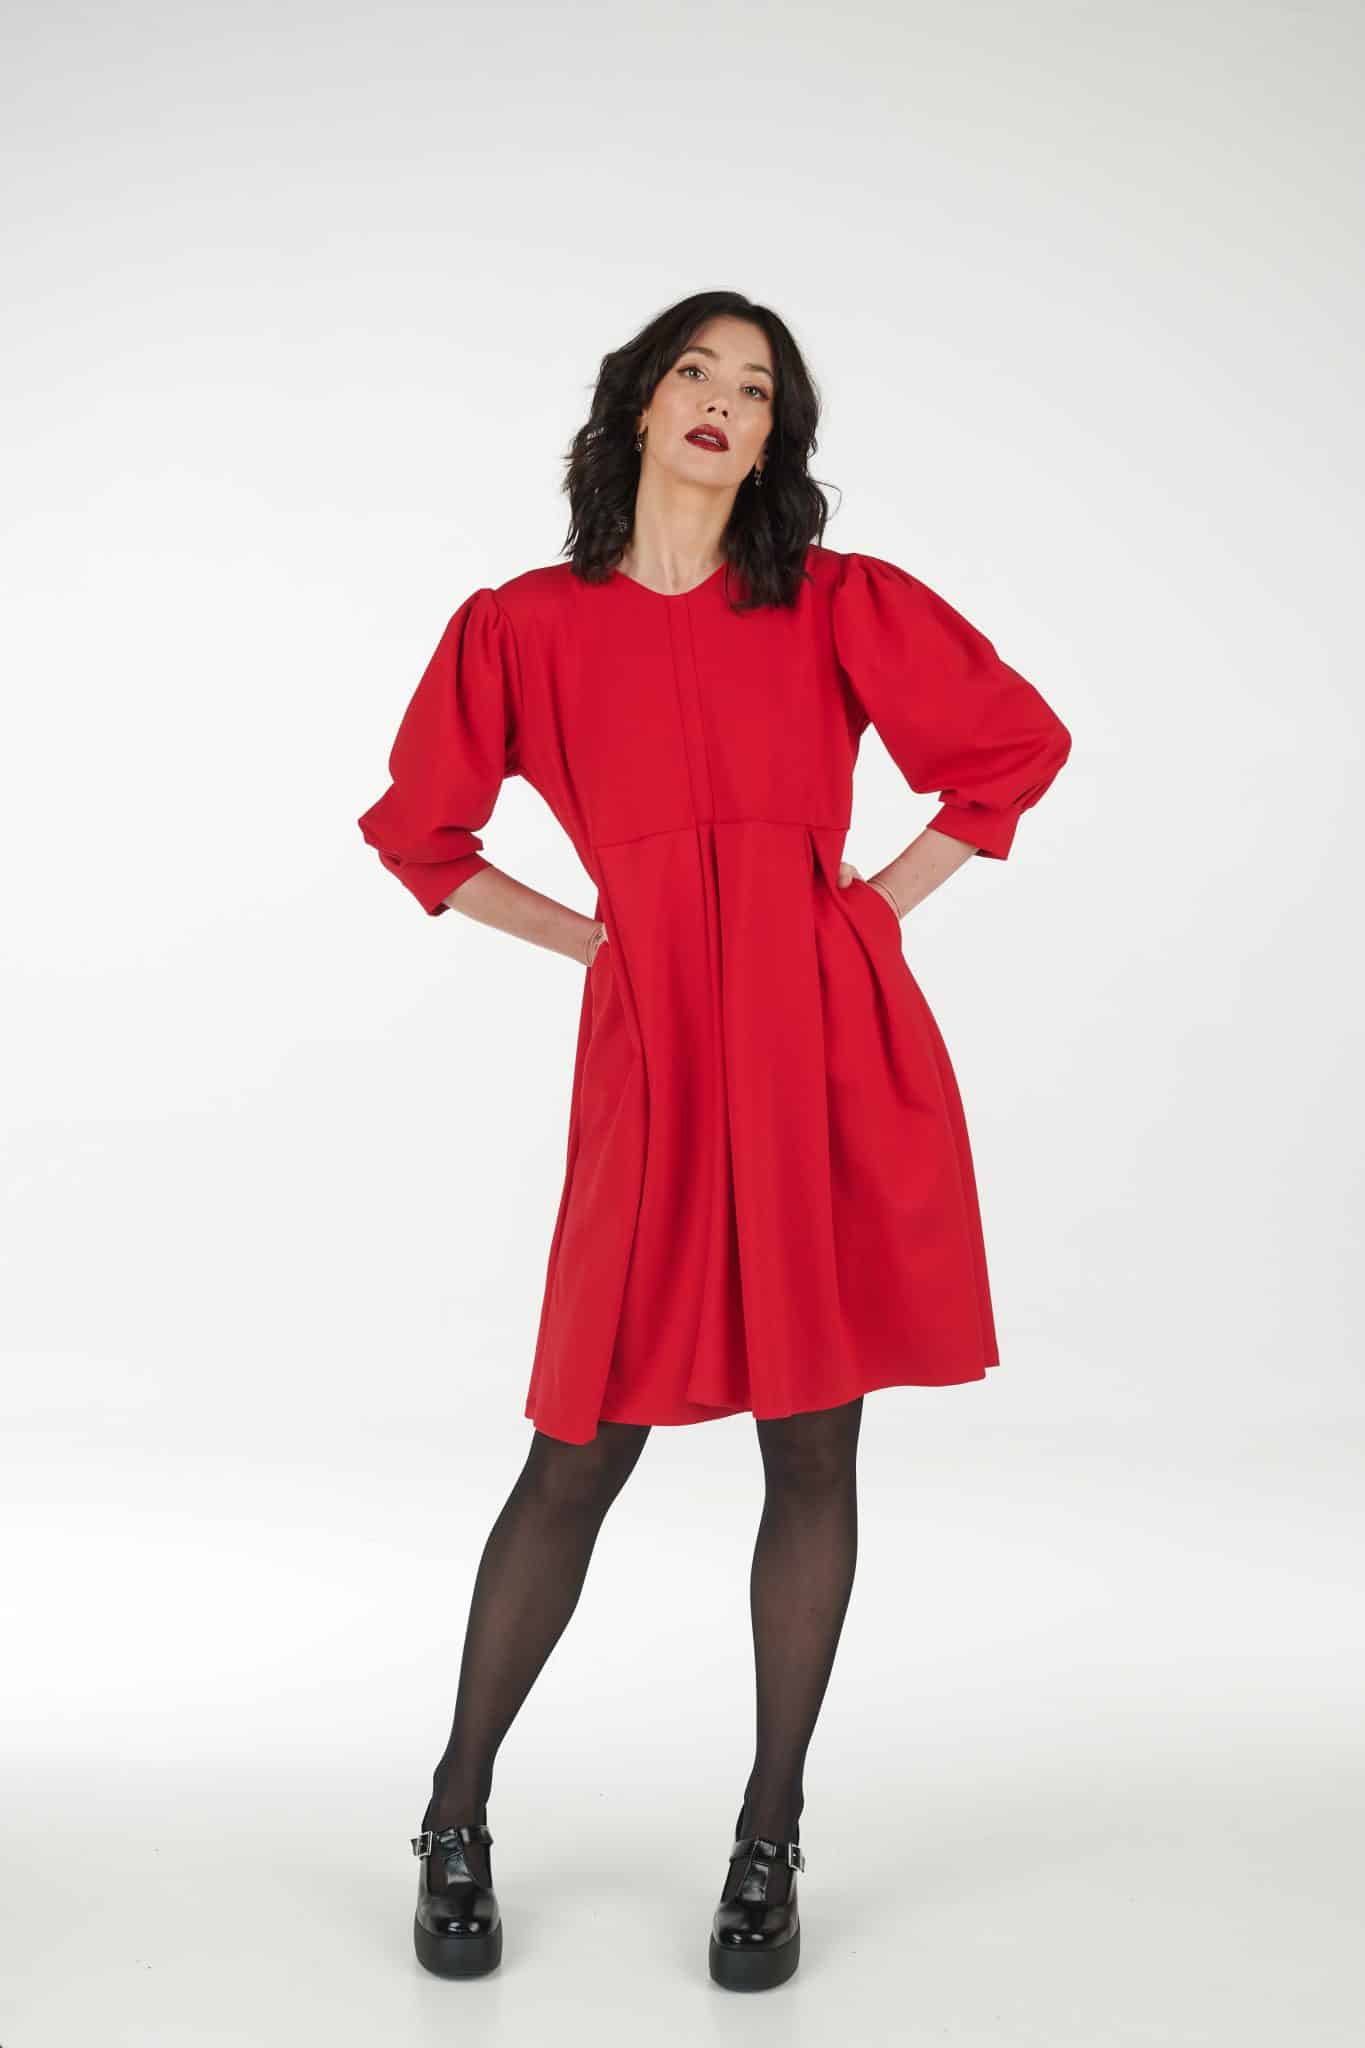 Your Happy Dance Dress in Red by UMU